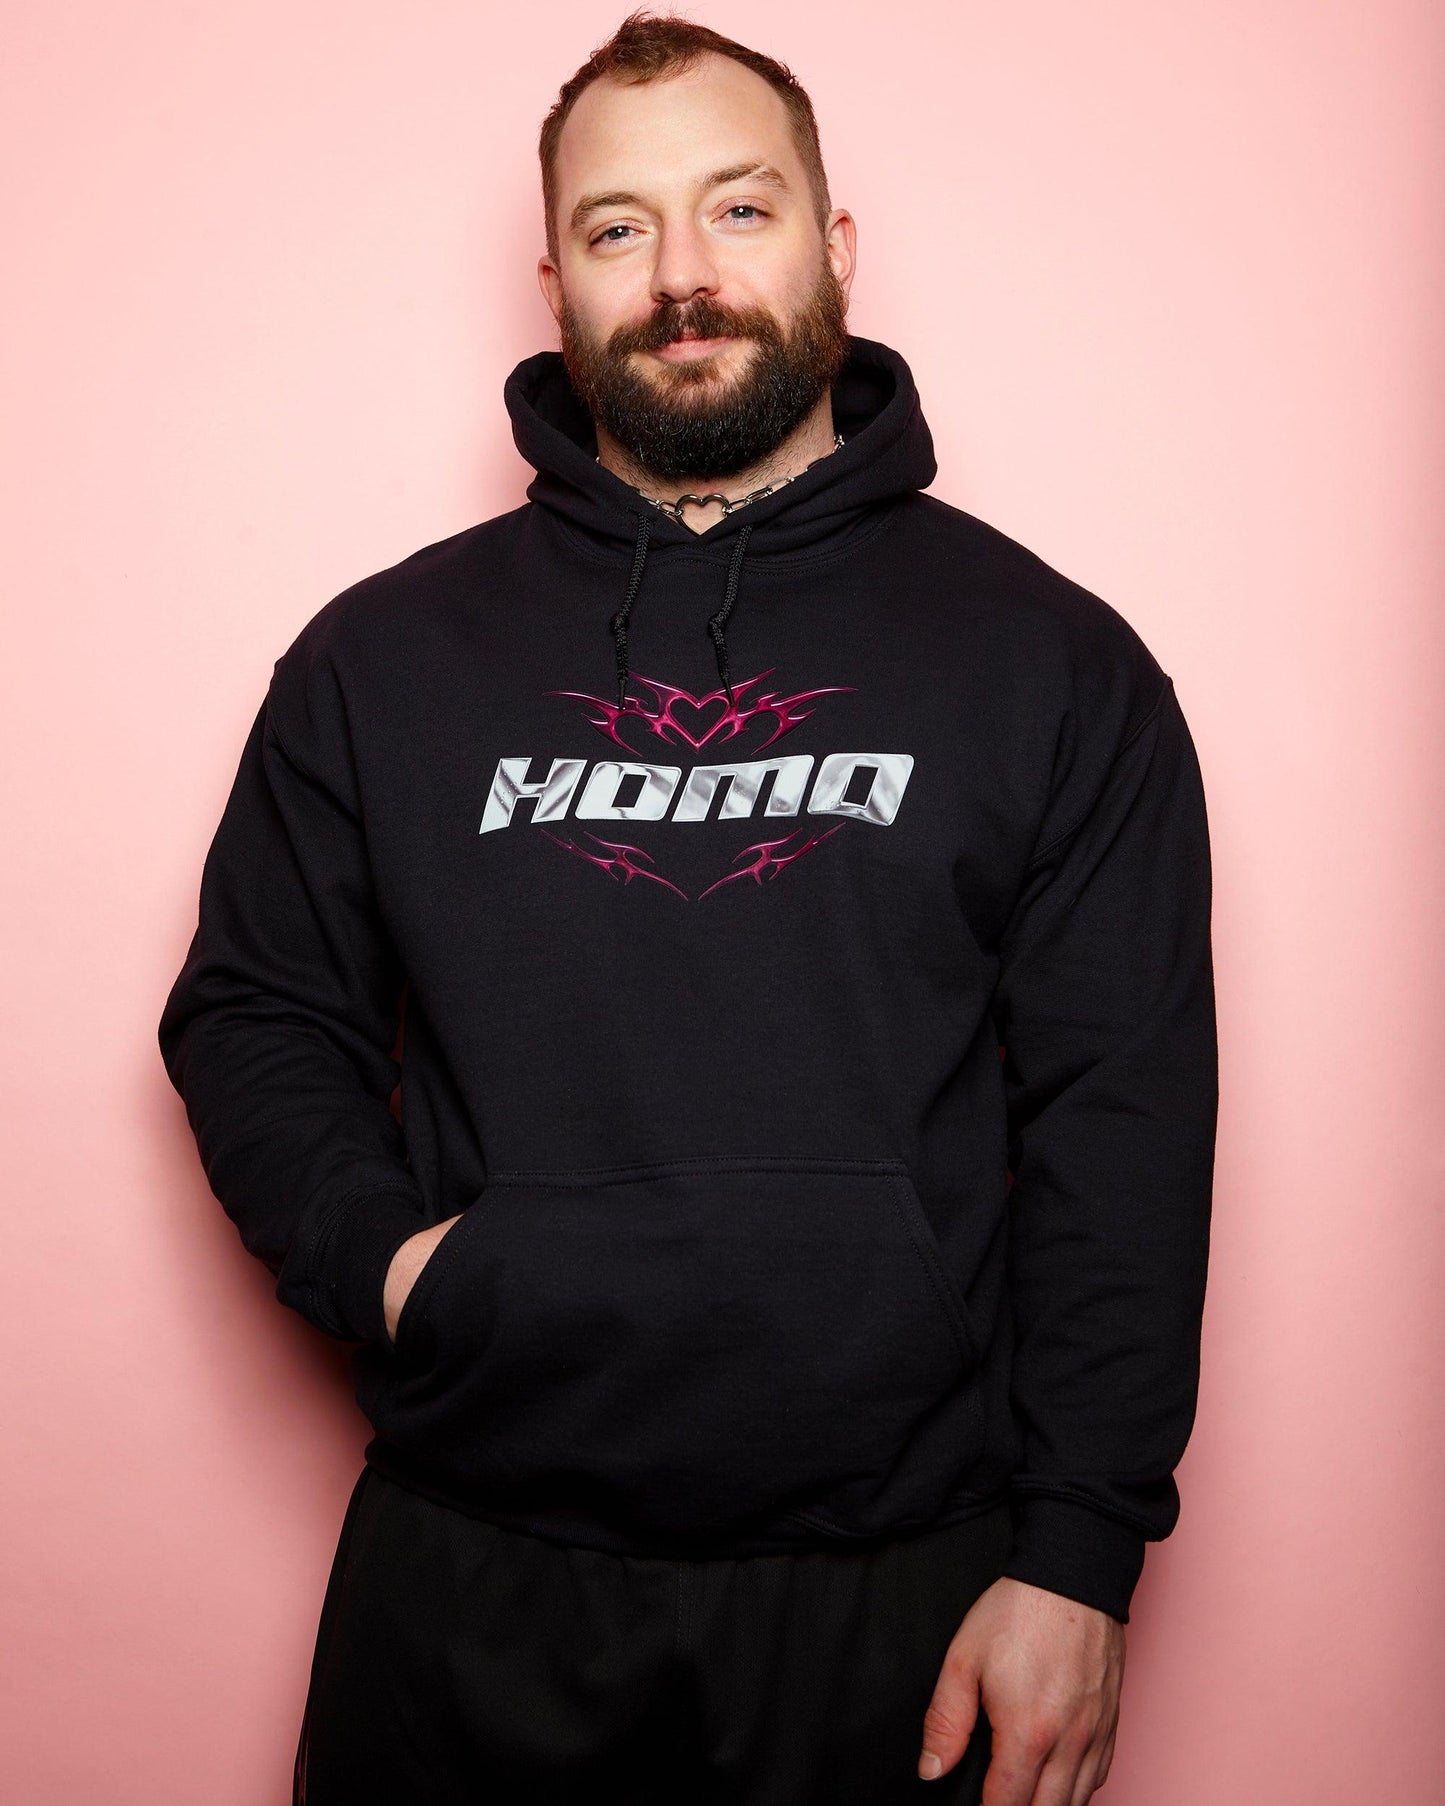 Chrome Y2K: HOMO, silver and pink on black - pullover hoodie. - HOMOLONDON